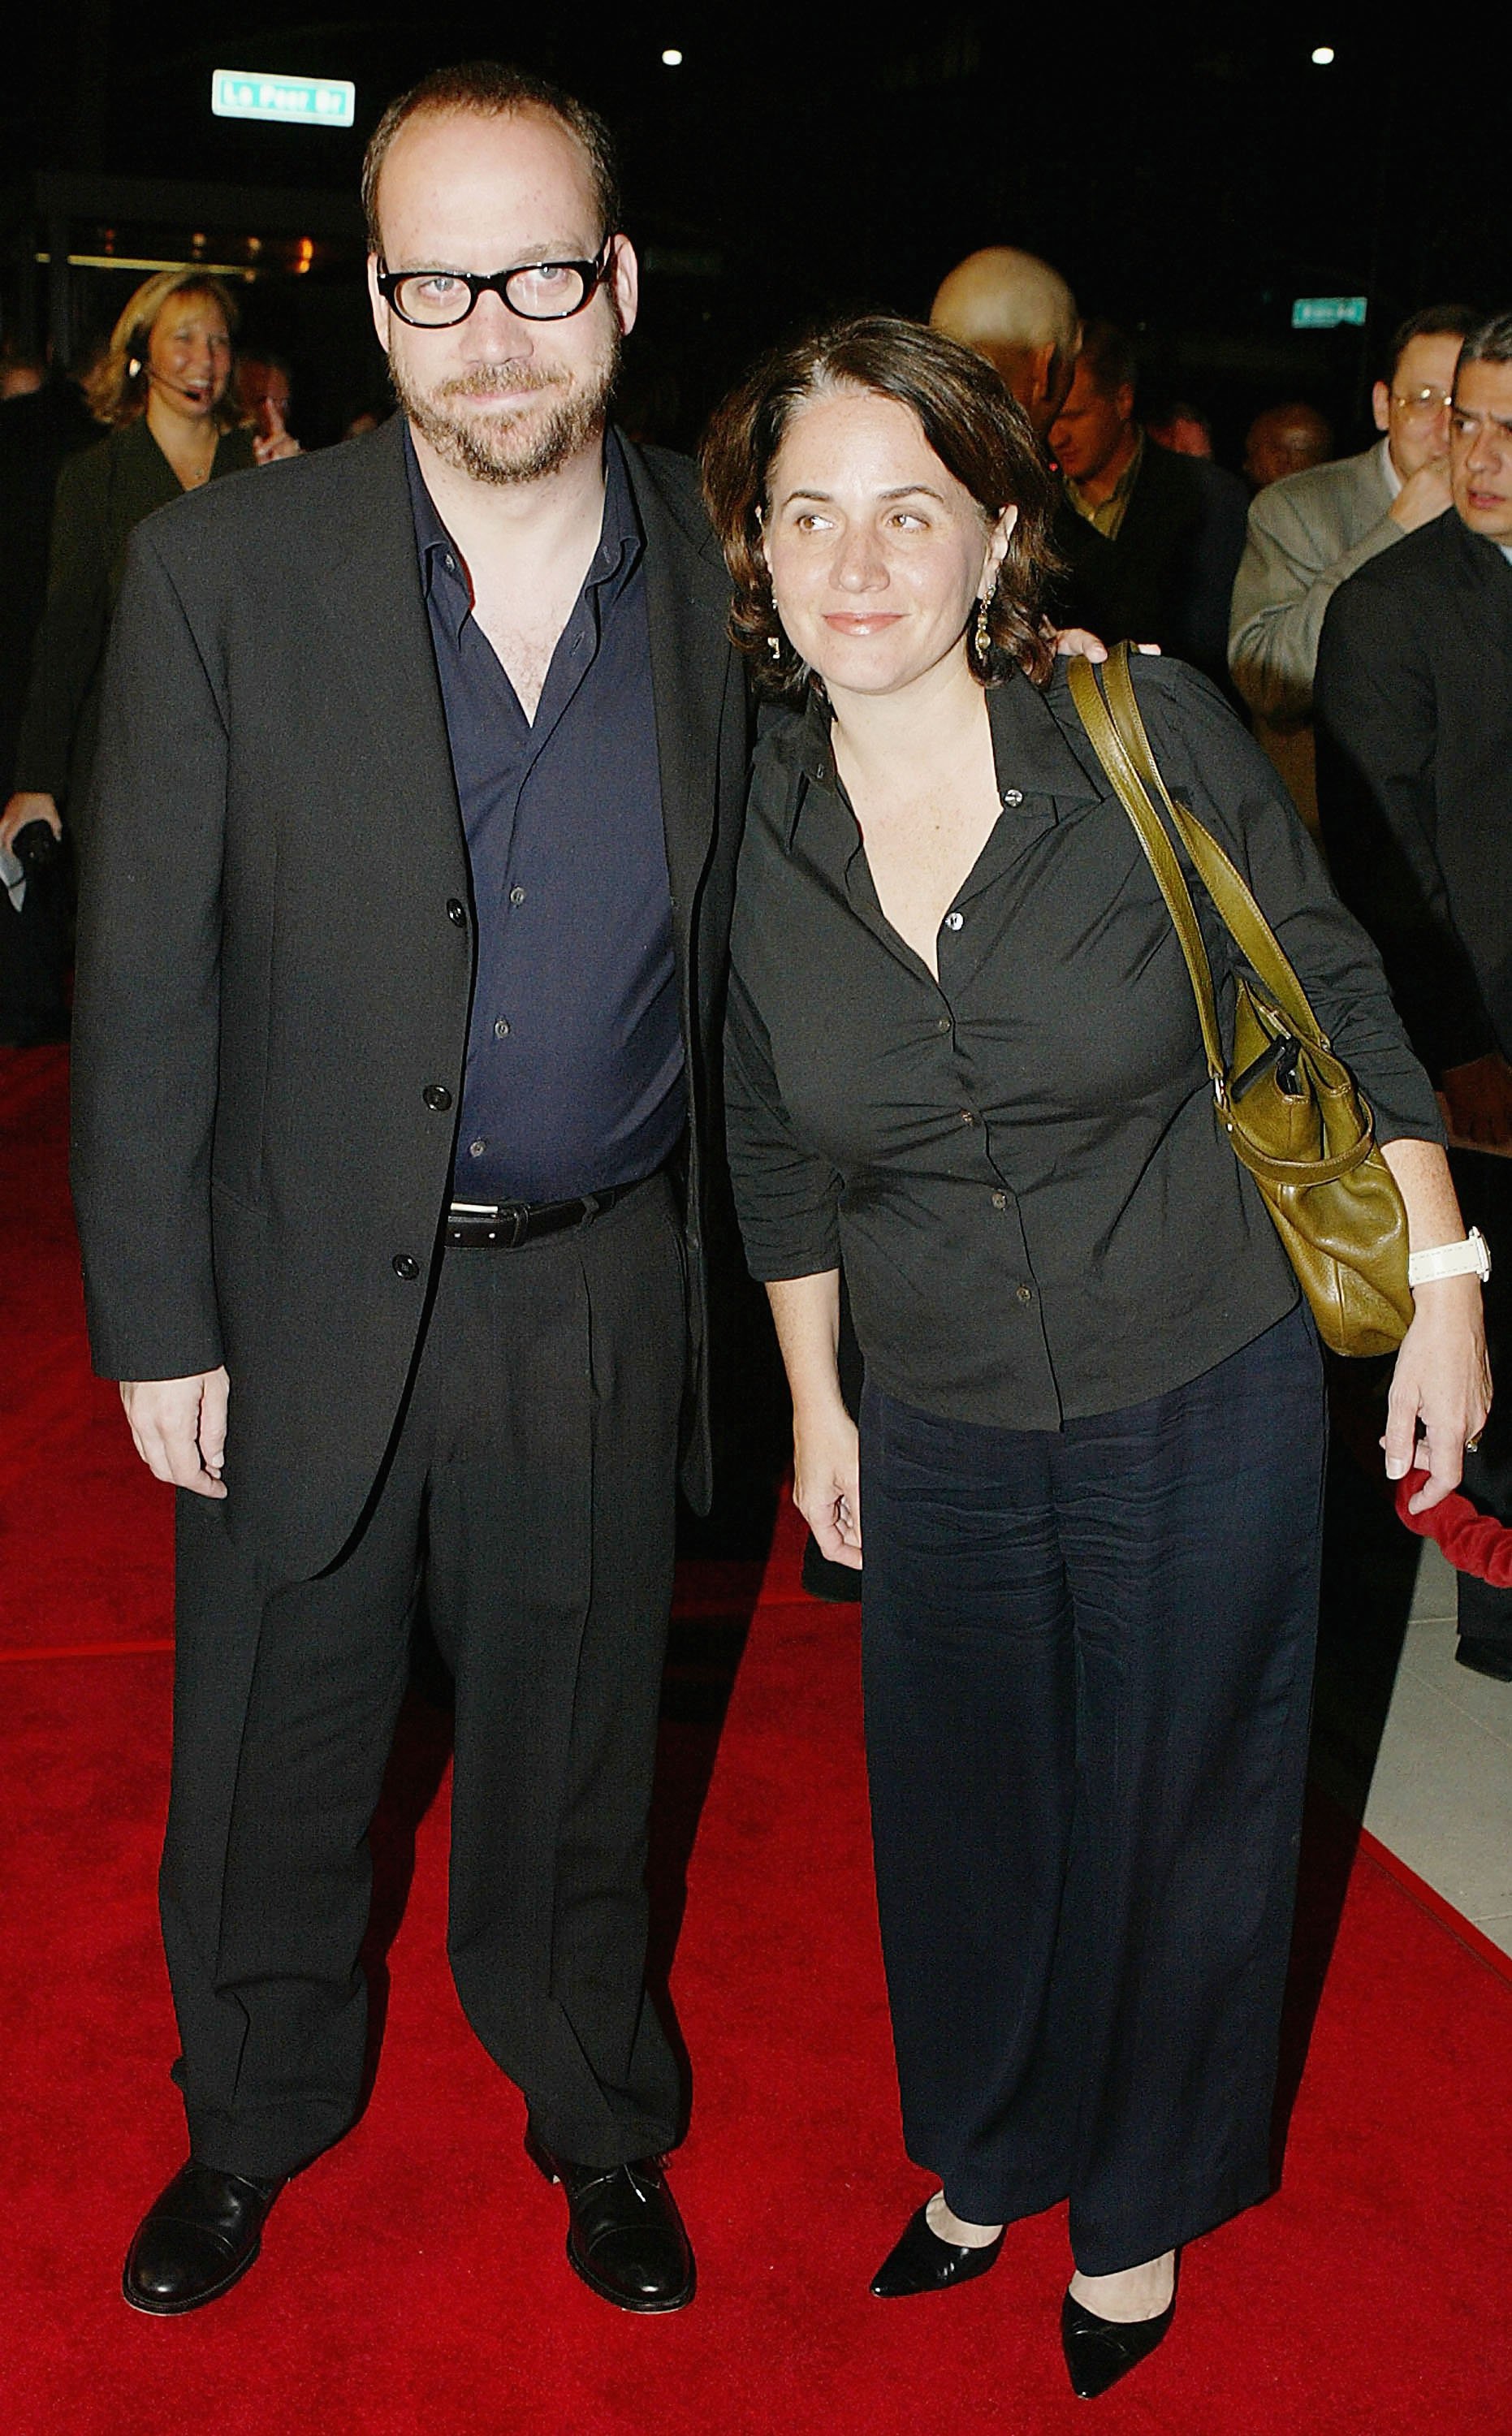 Paul Giamatti and Elizabeth Giamatti during the premiere of "Sideways" at the Academy of Motion Picture and Sciences on October 12, 2004, in Los Angeles, California. | Source: Getty Images